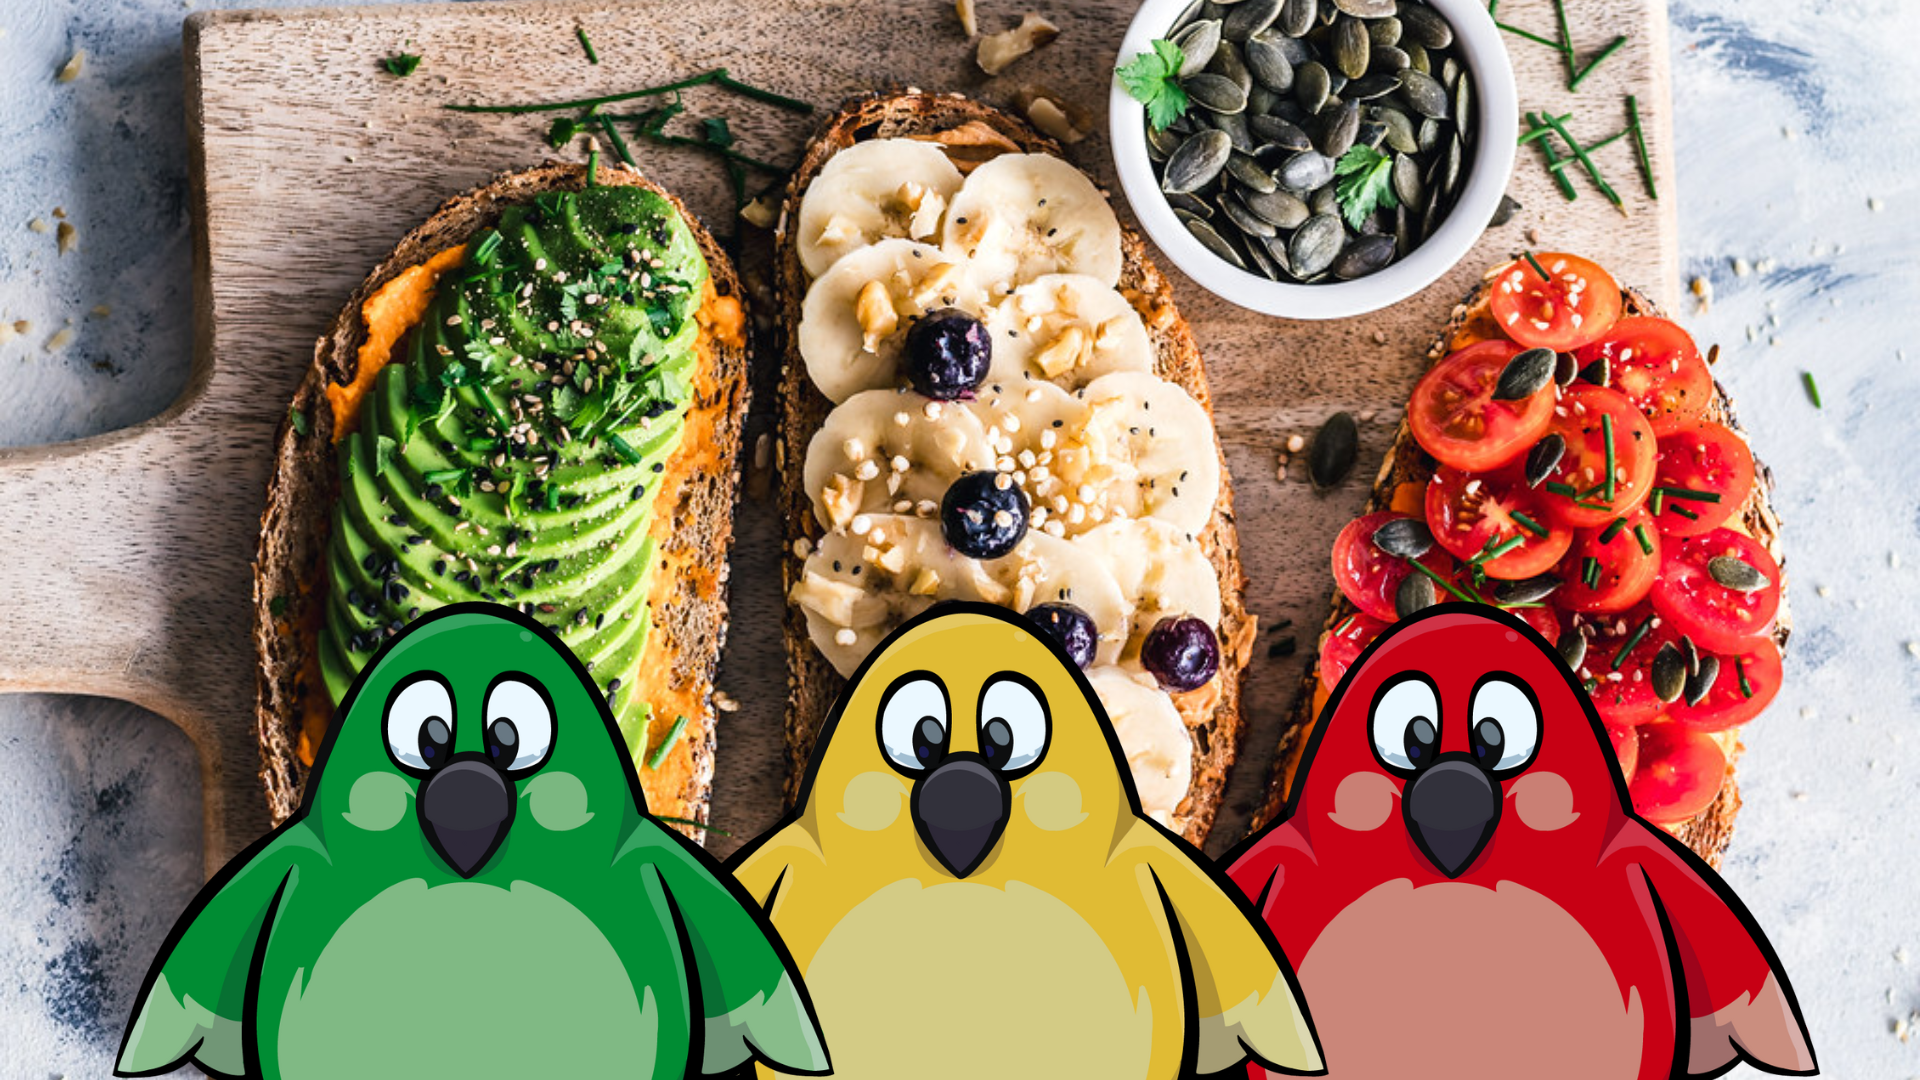 A green, yellow, and red parrot in front of toast with colorful fruit like bananas and cherry tomatoes. This is one of our healthy lunch ideas for kids at home.